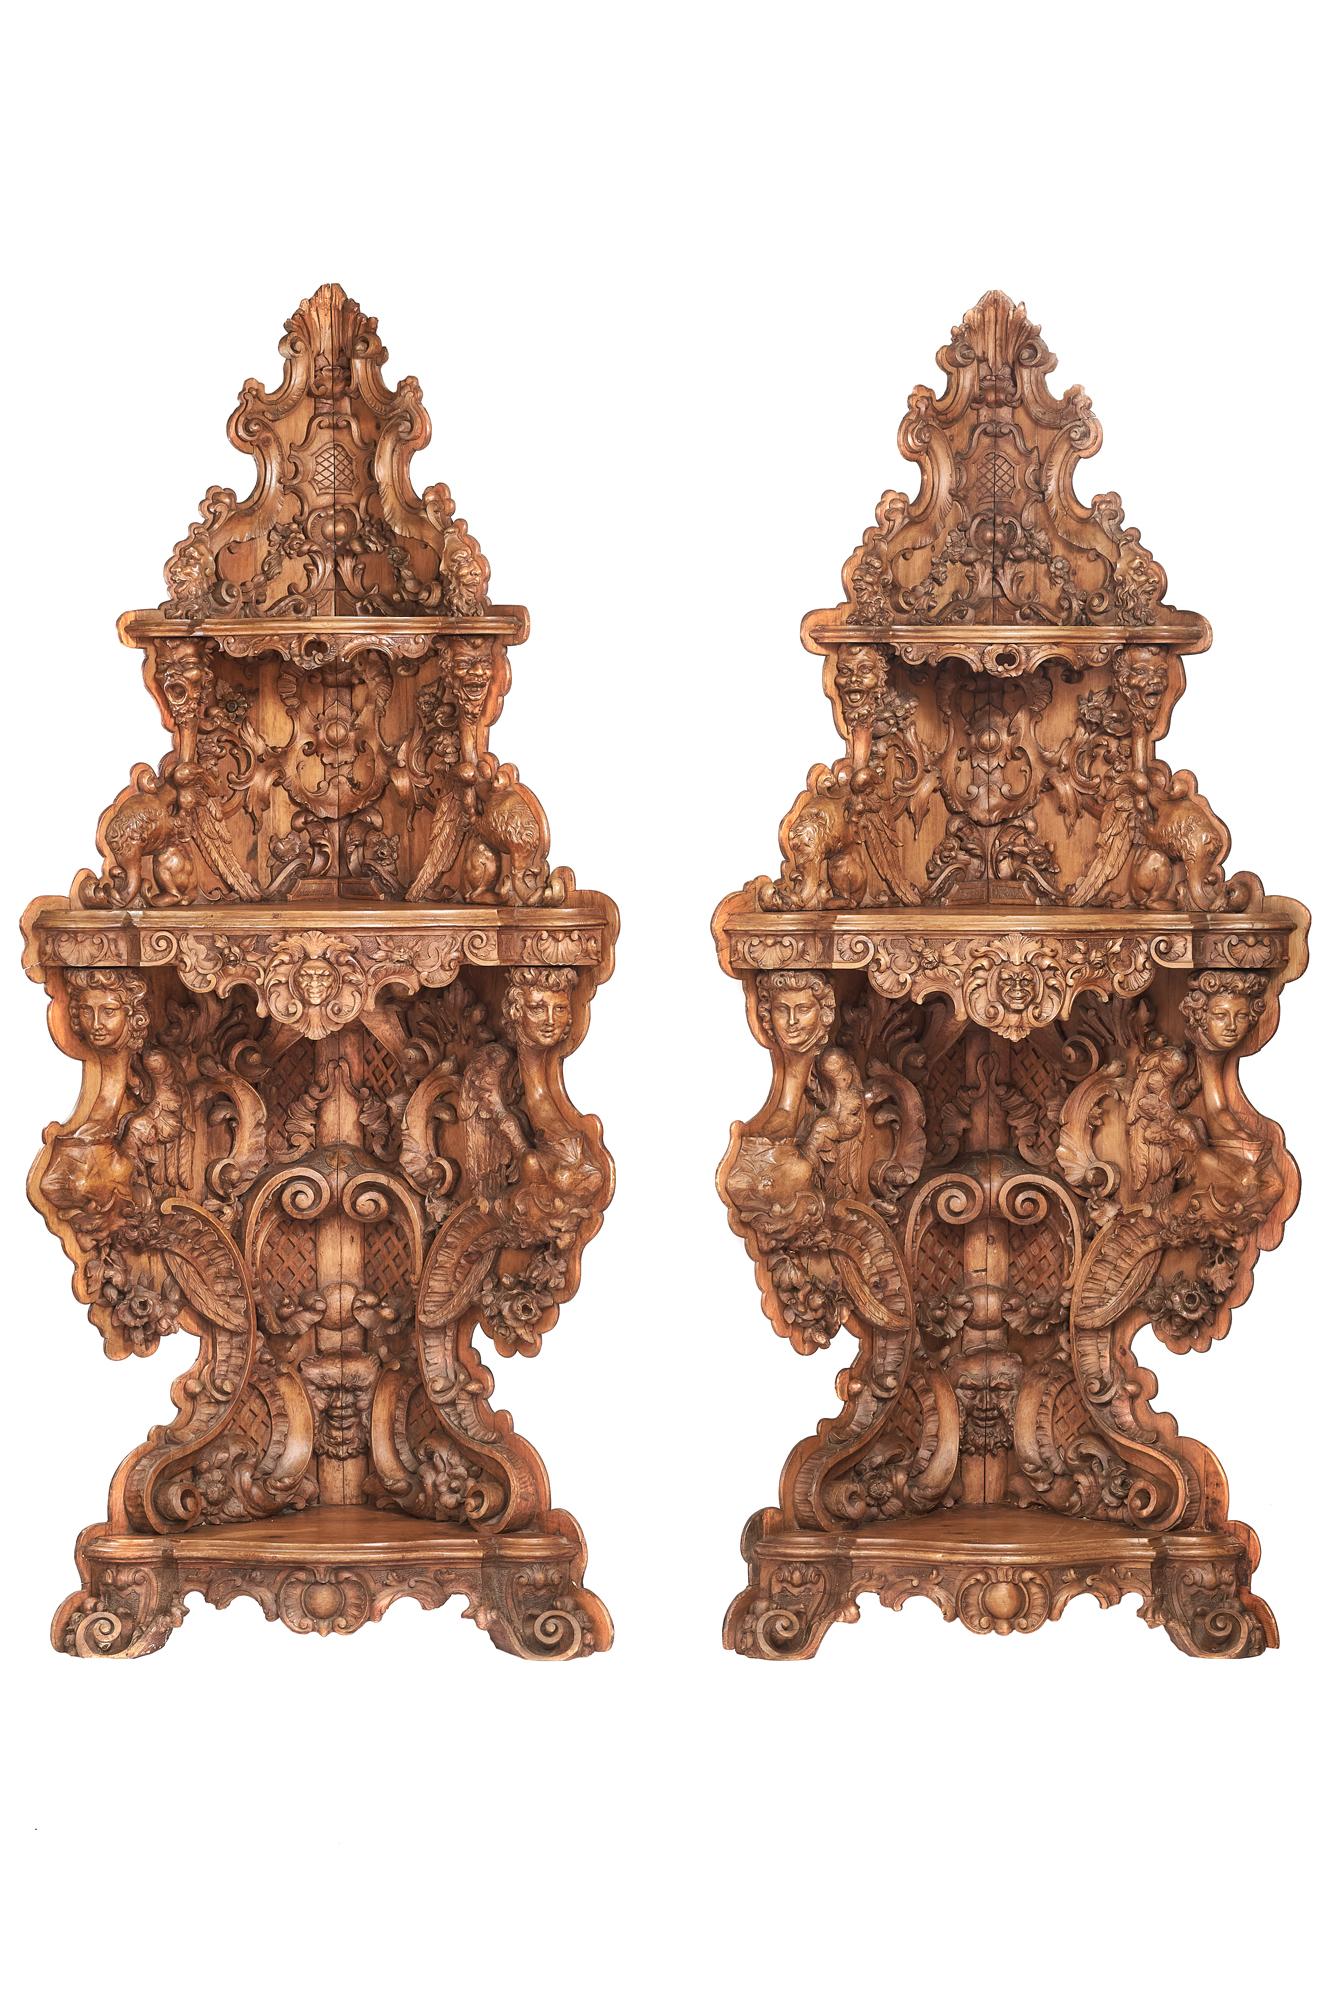 Impressive pair C19th Italian limewood carved Corner shelves
Carving in the Renaissance & Baroque manner, 
Fine Limewood carved, mask heads, Mythical Creatures, floral & leaf carving,
exceptional fine detailed carving
Pine Back boards, fixed